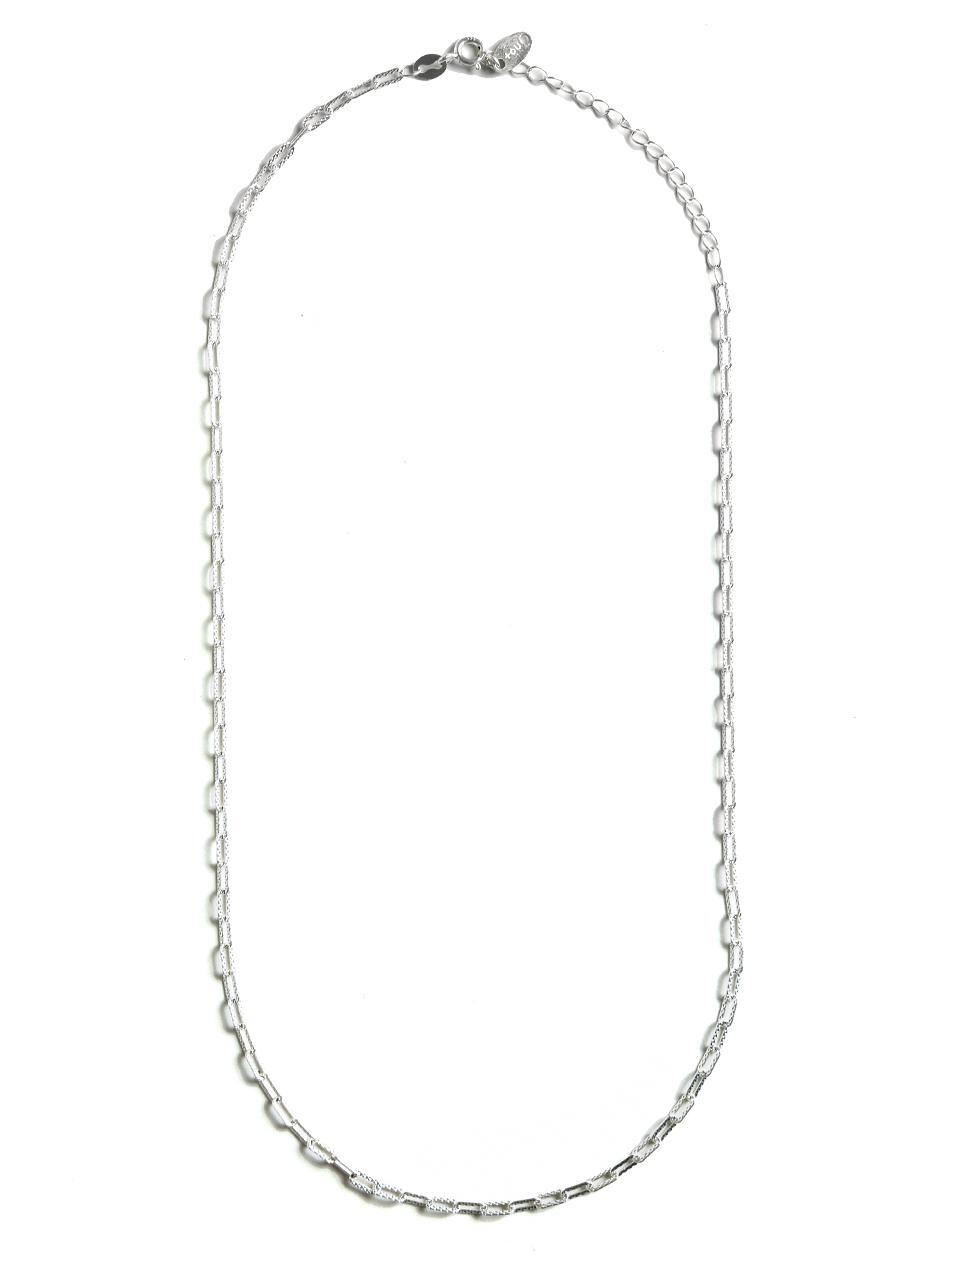 [Silver925] WE009 Textured link chain necklace